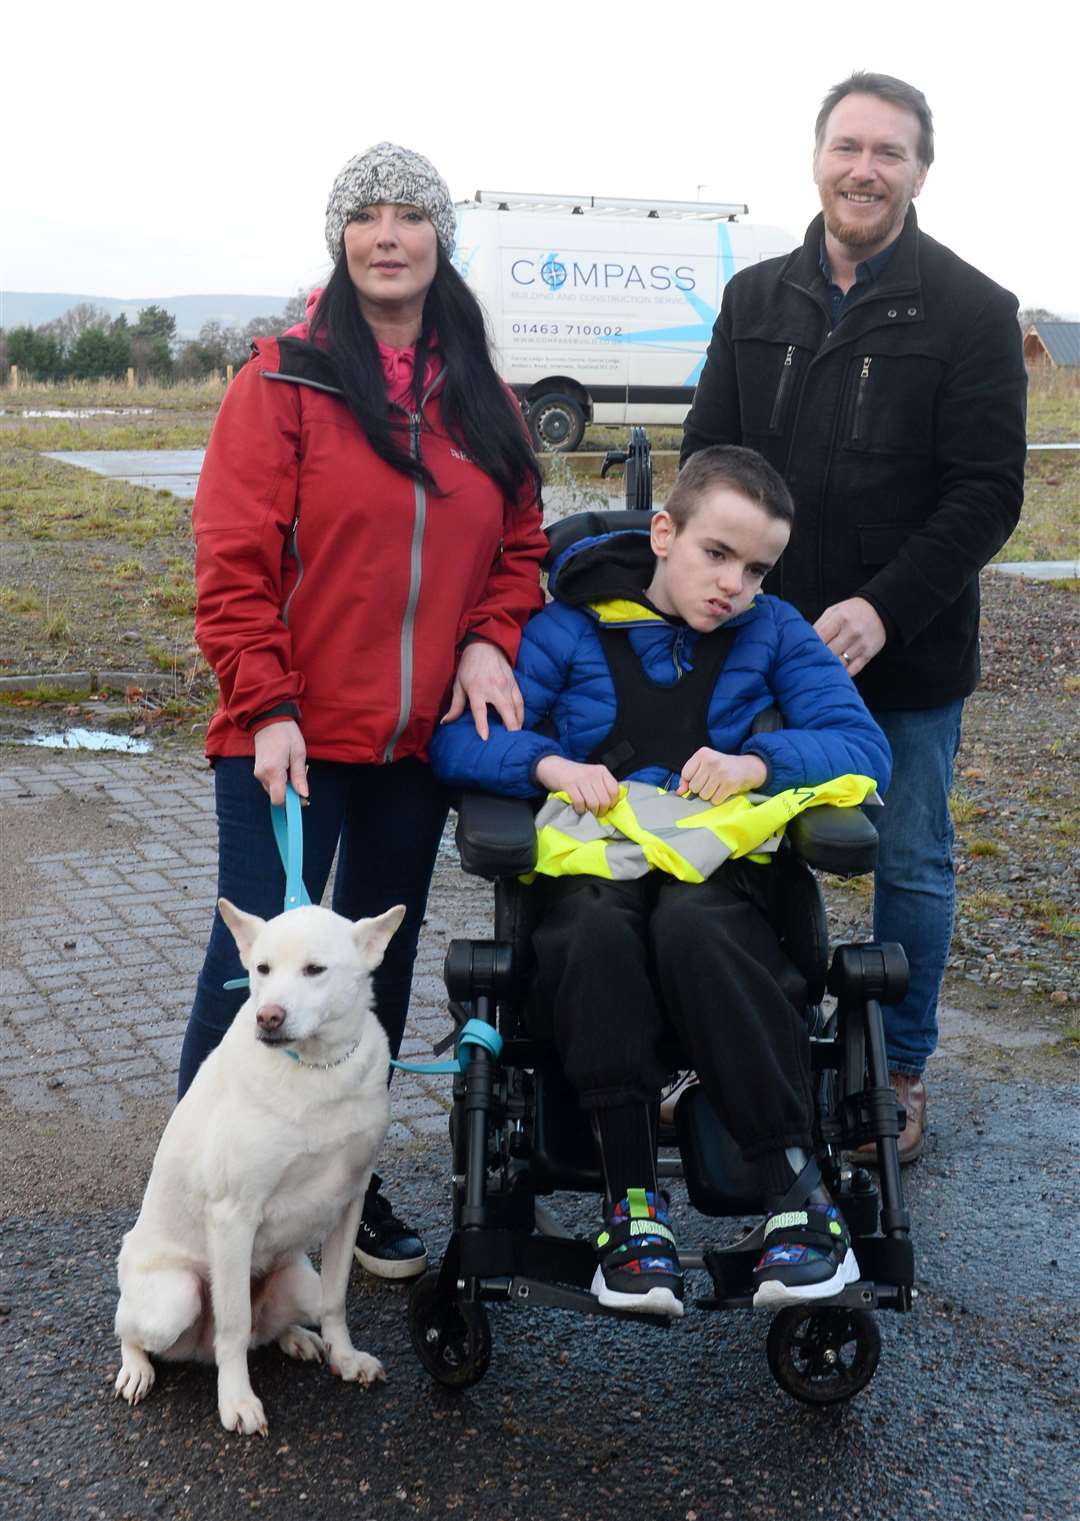 Amanda, Tobias and Kyle Leask with family dog, Miracle, at the Haven Centre site.